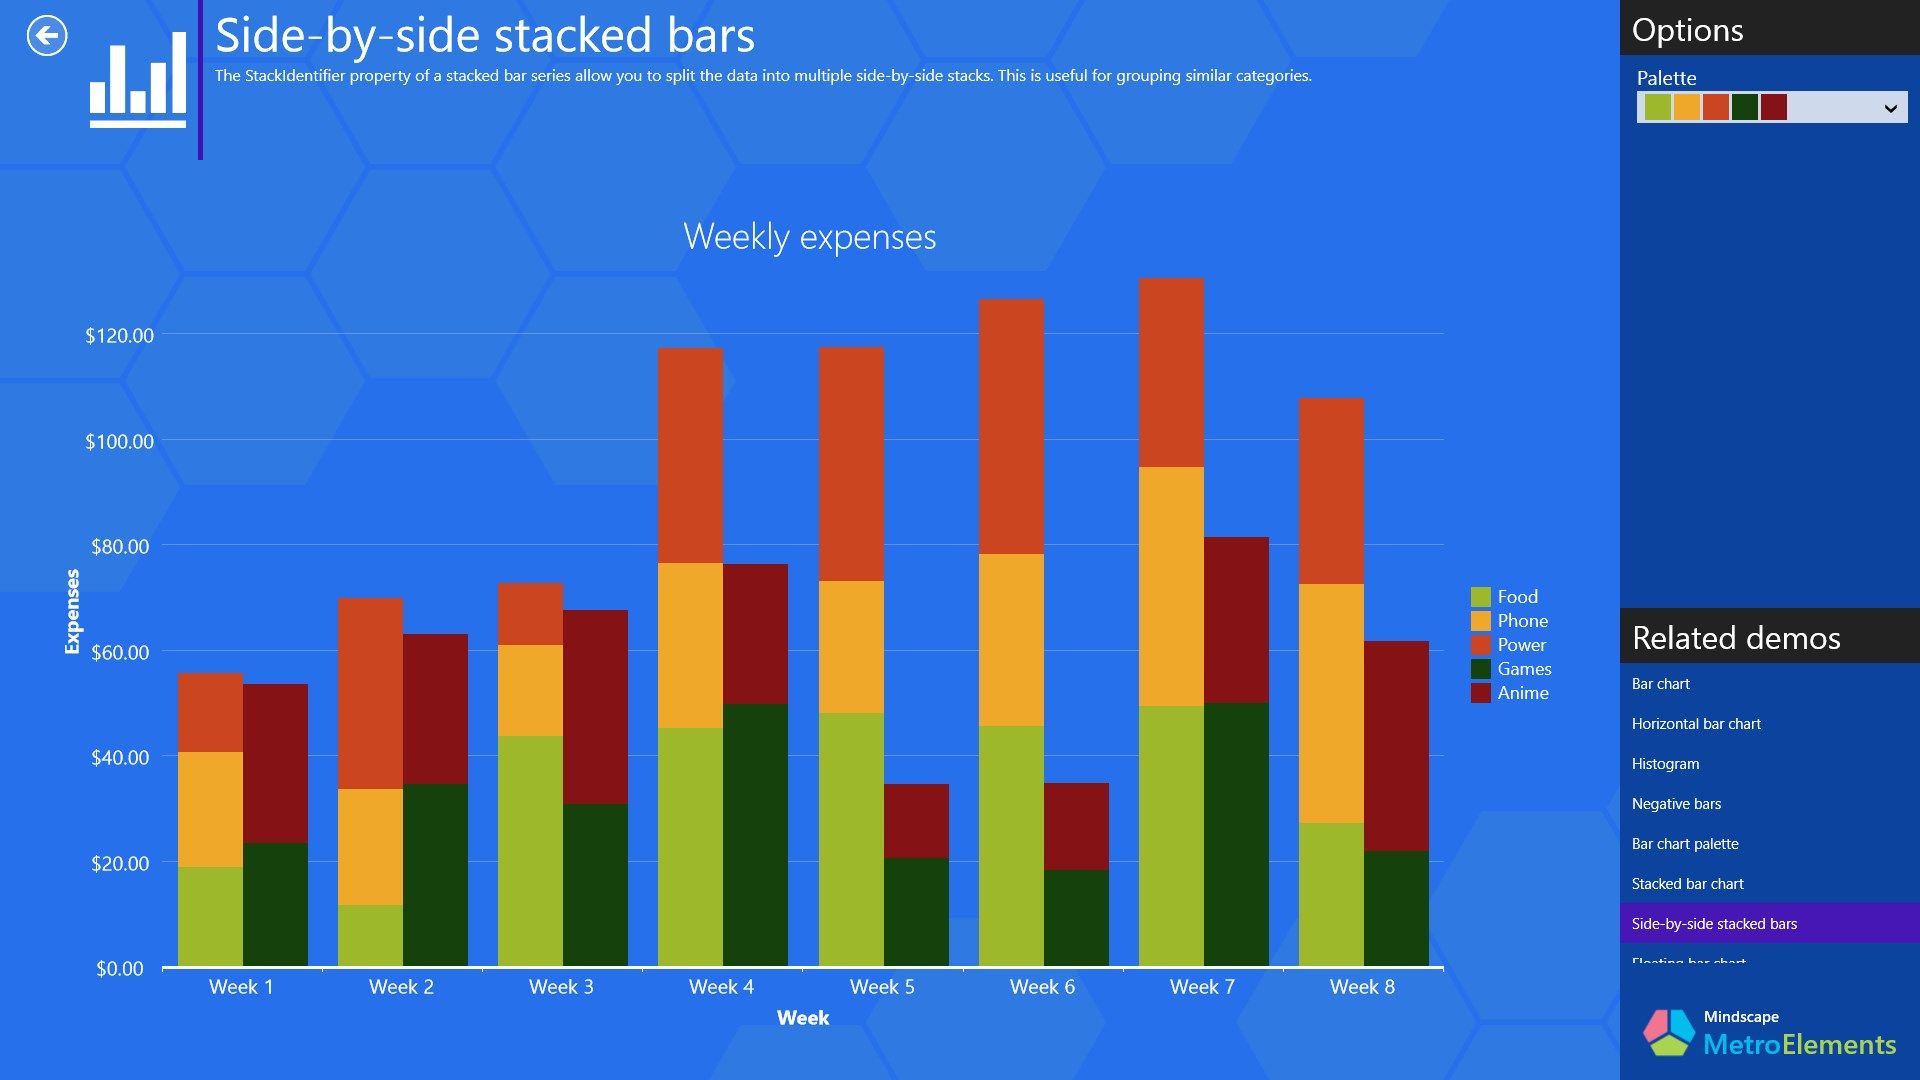 Side-by-side stacked bars - One of many different types of bar charts.